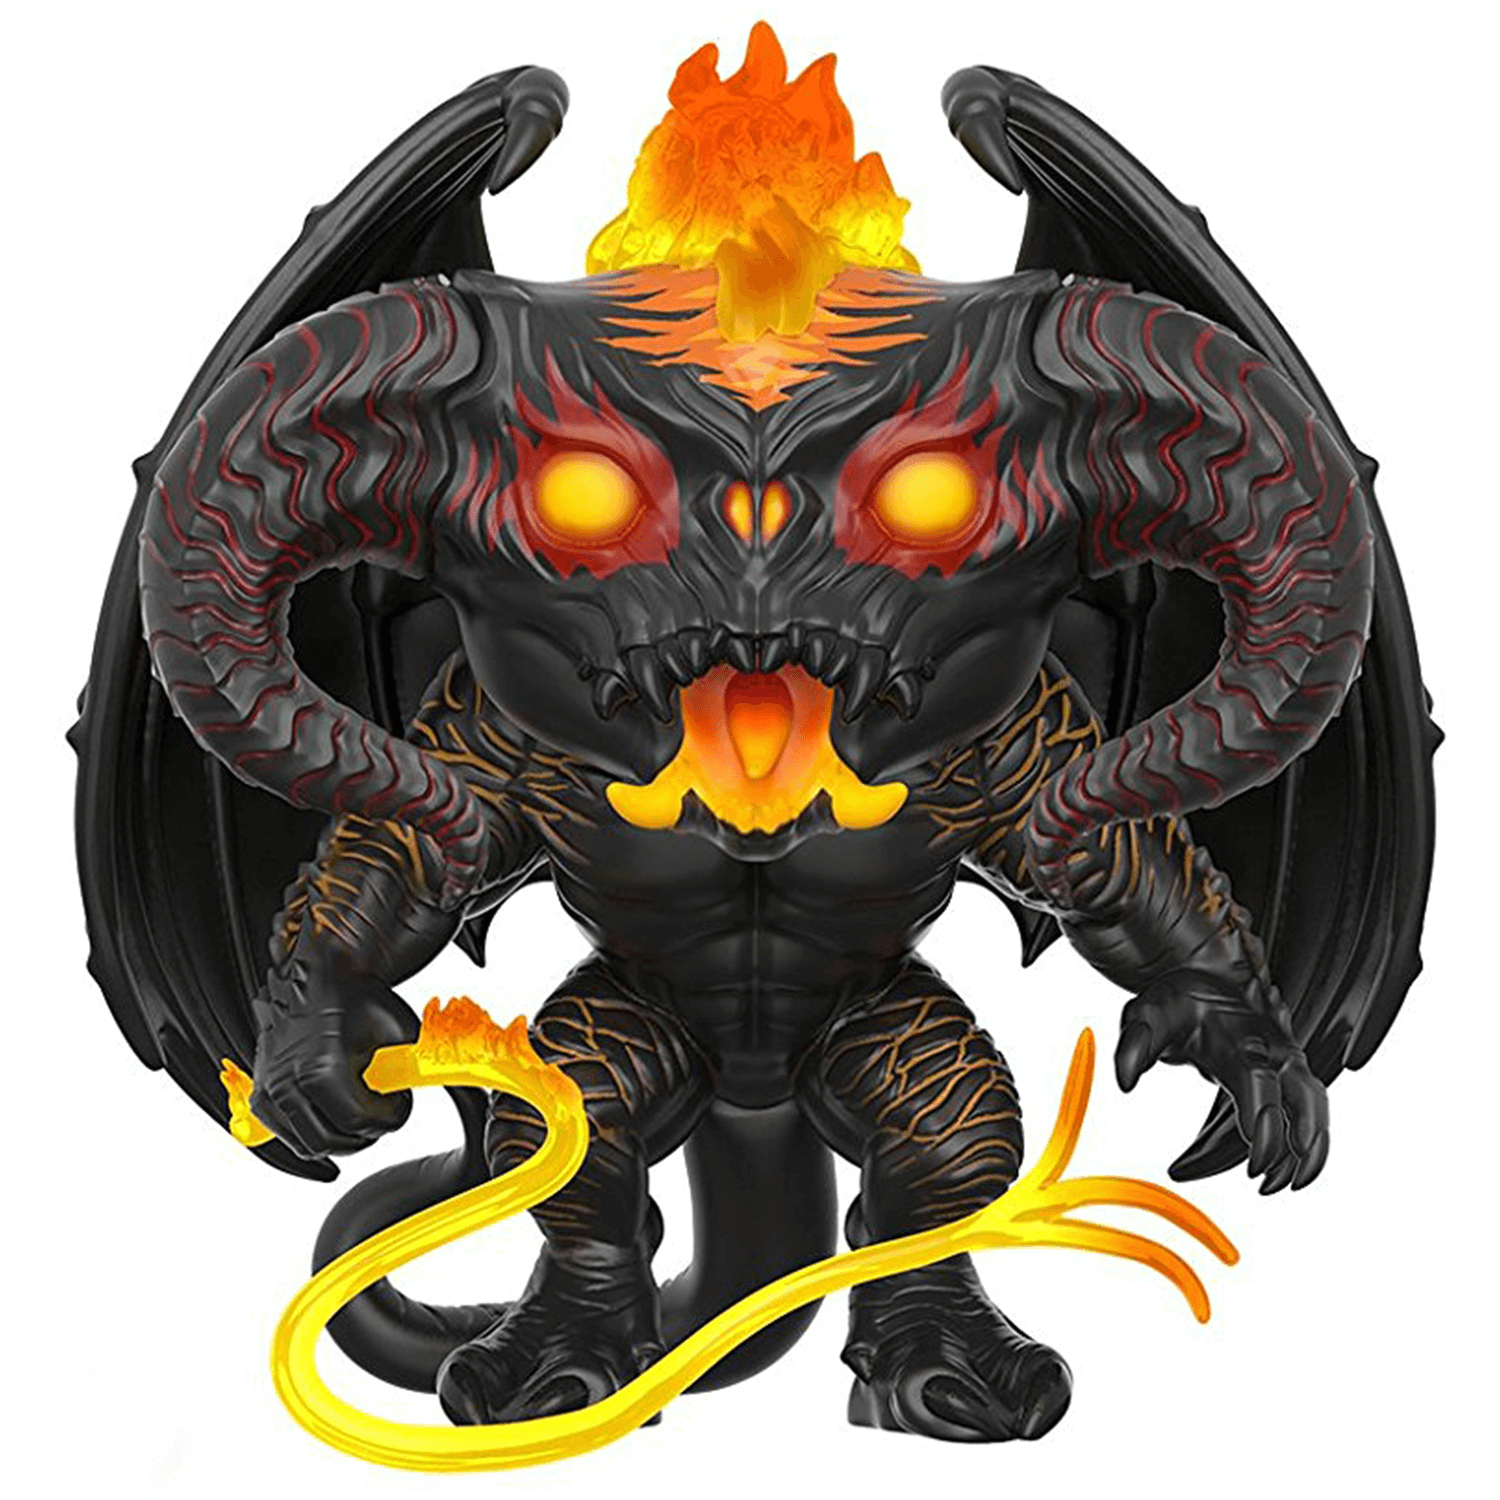 The Lord of the Rings Balrog Super Sized Funko Pop! Vinyl